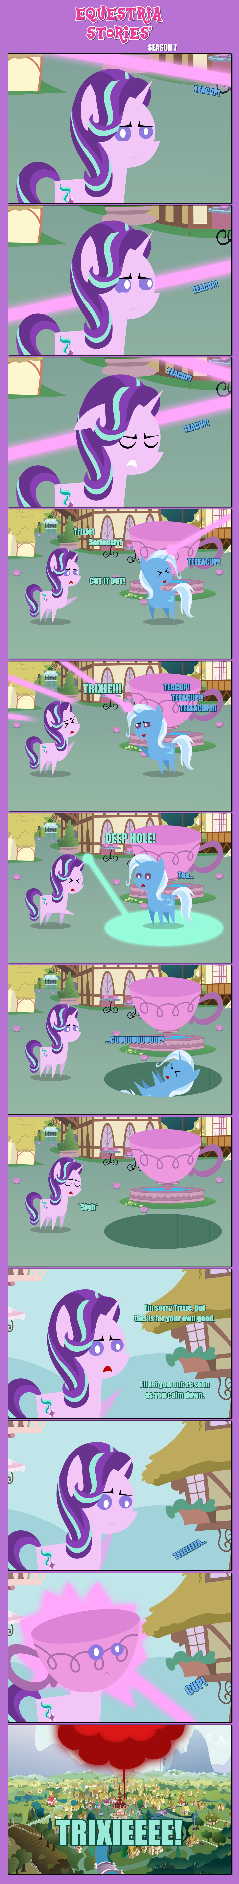 ES' S7: ''FOLLOW UP - All Bottled Up''